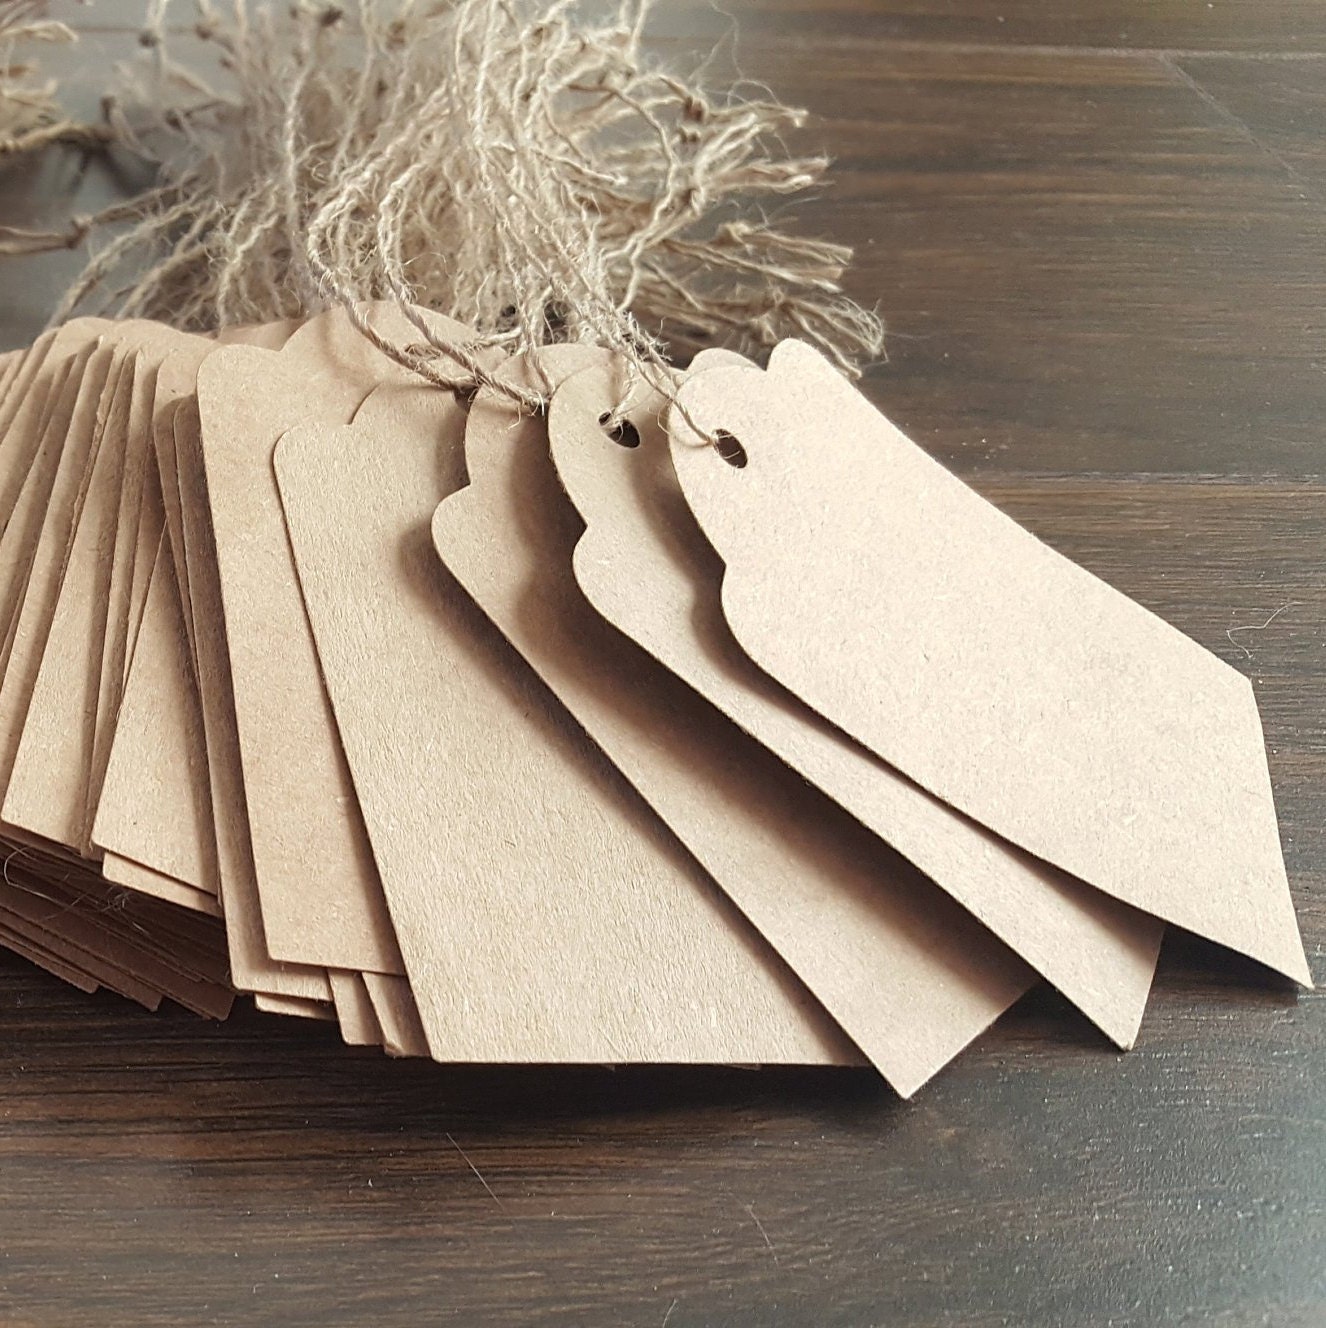 100 PCS Kraft Paper Tags Scallop Edges Brown Hang Tag Wedding Party Favor  Tags with Free Natural Jute Twine 